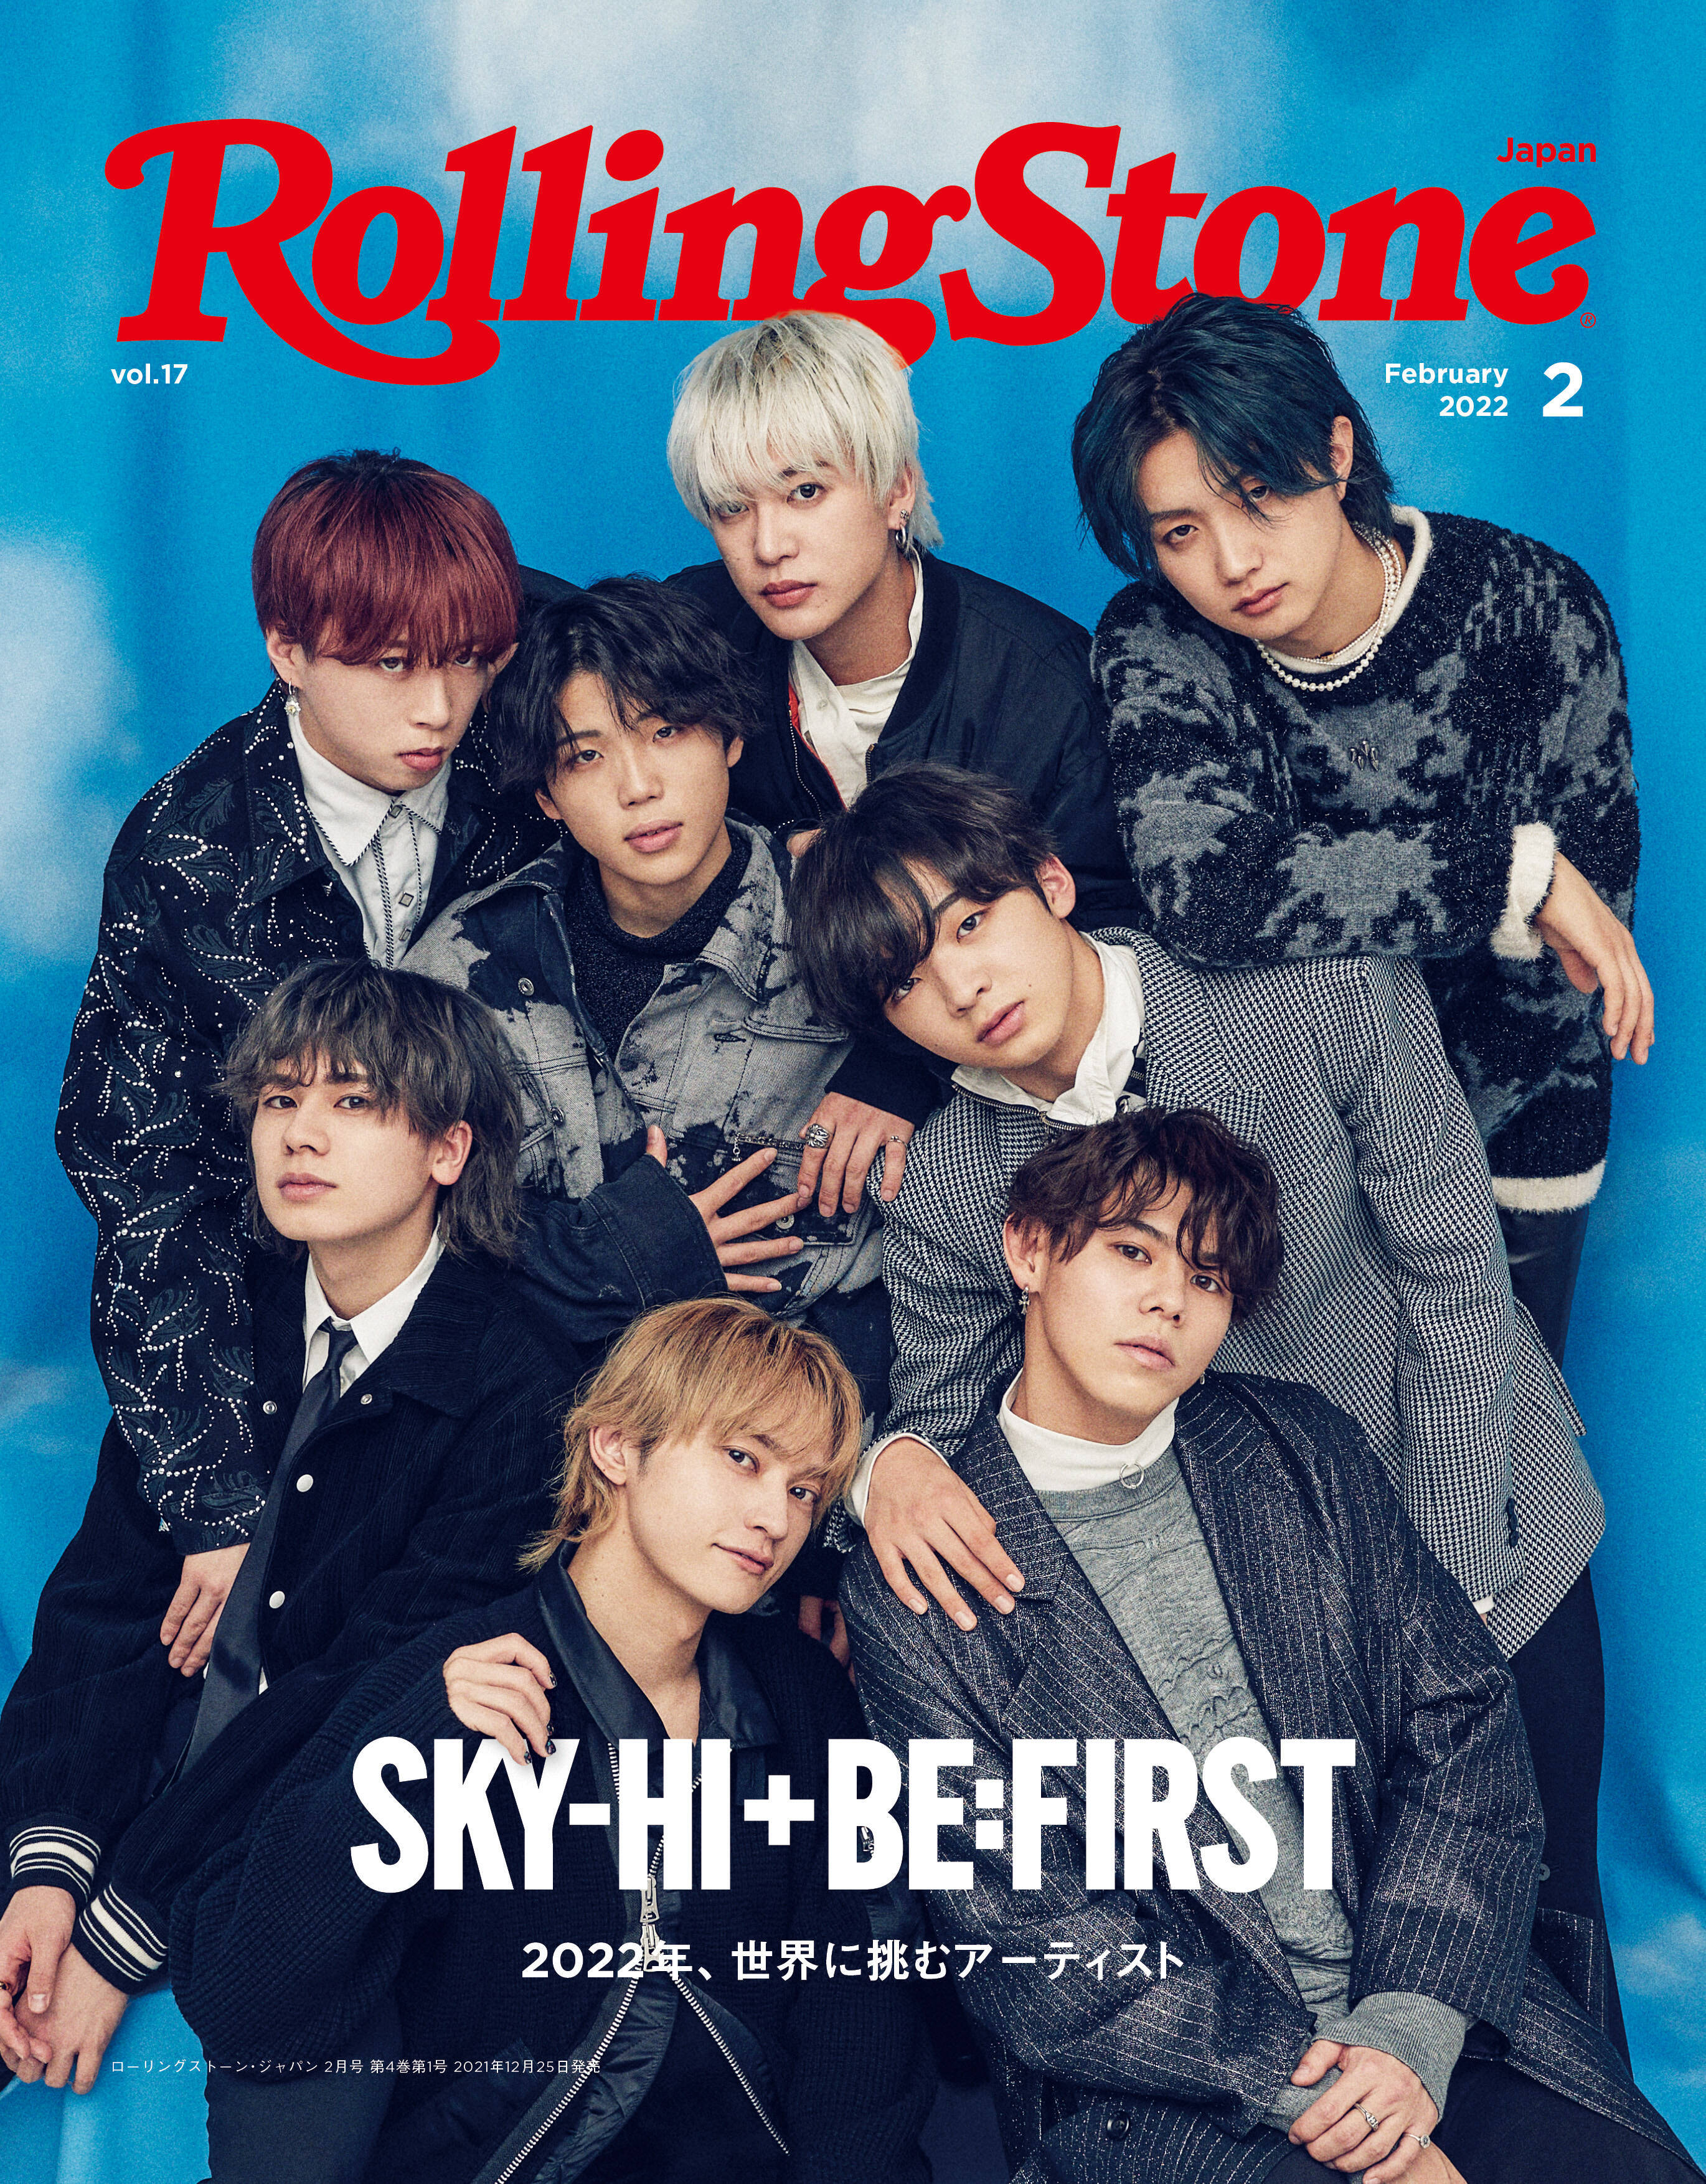 SKY-HI＋BE:FIRSTでの記念すべき初表紙　Rolling Stone Japan次号ビジュアル解禁